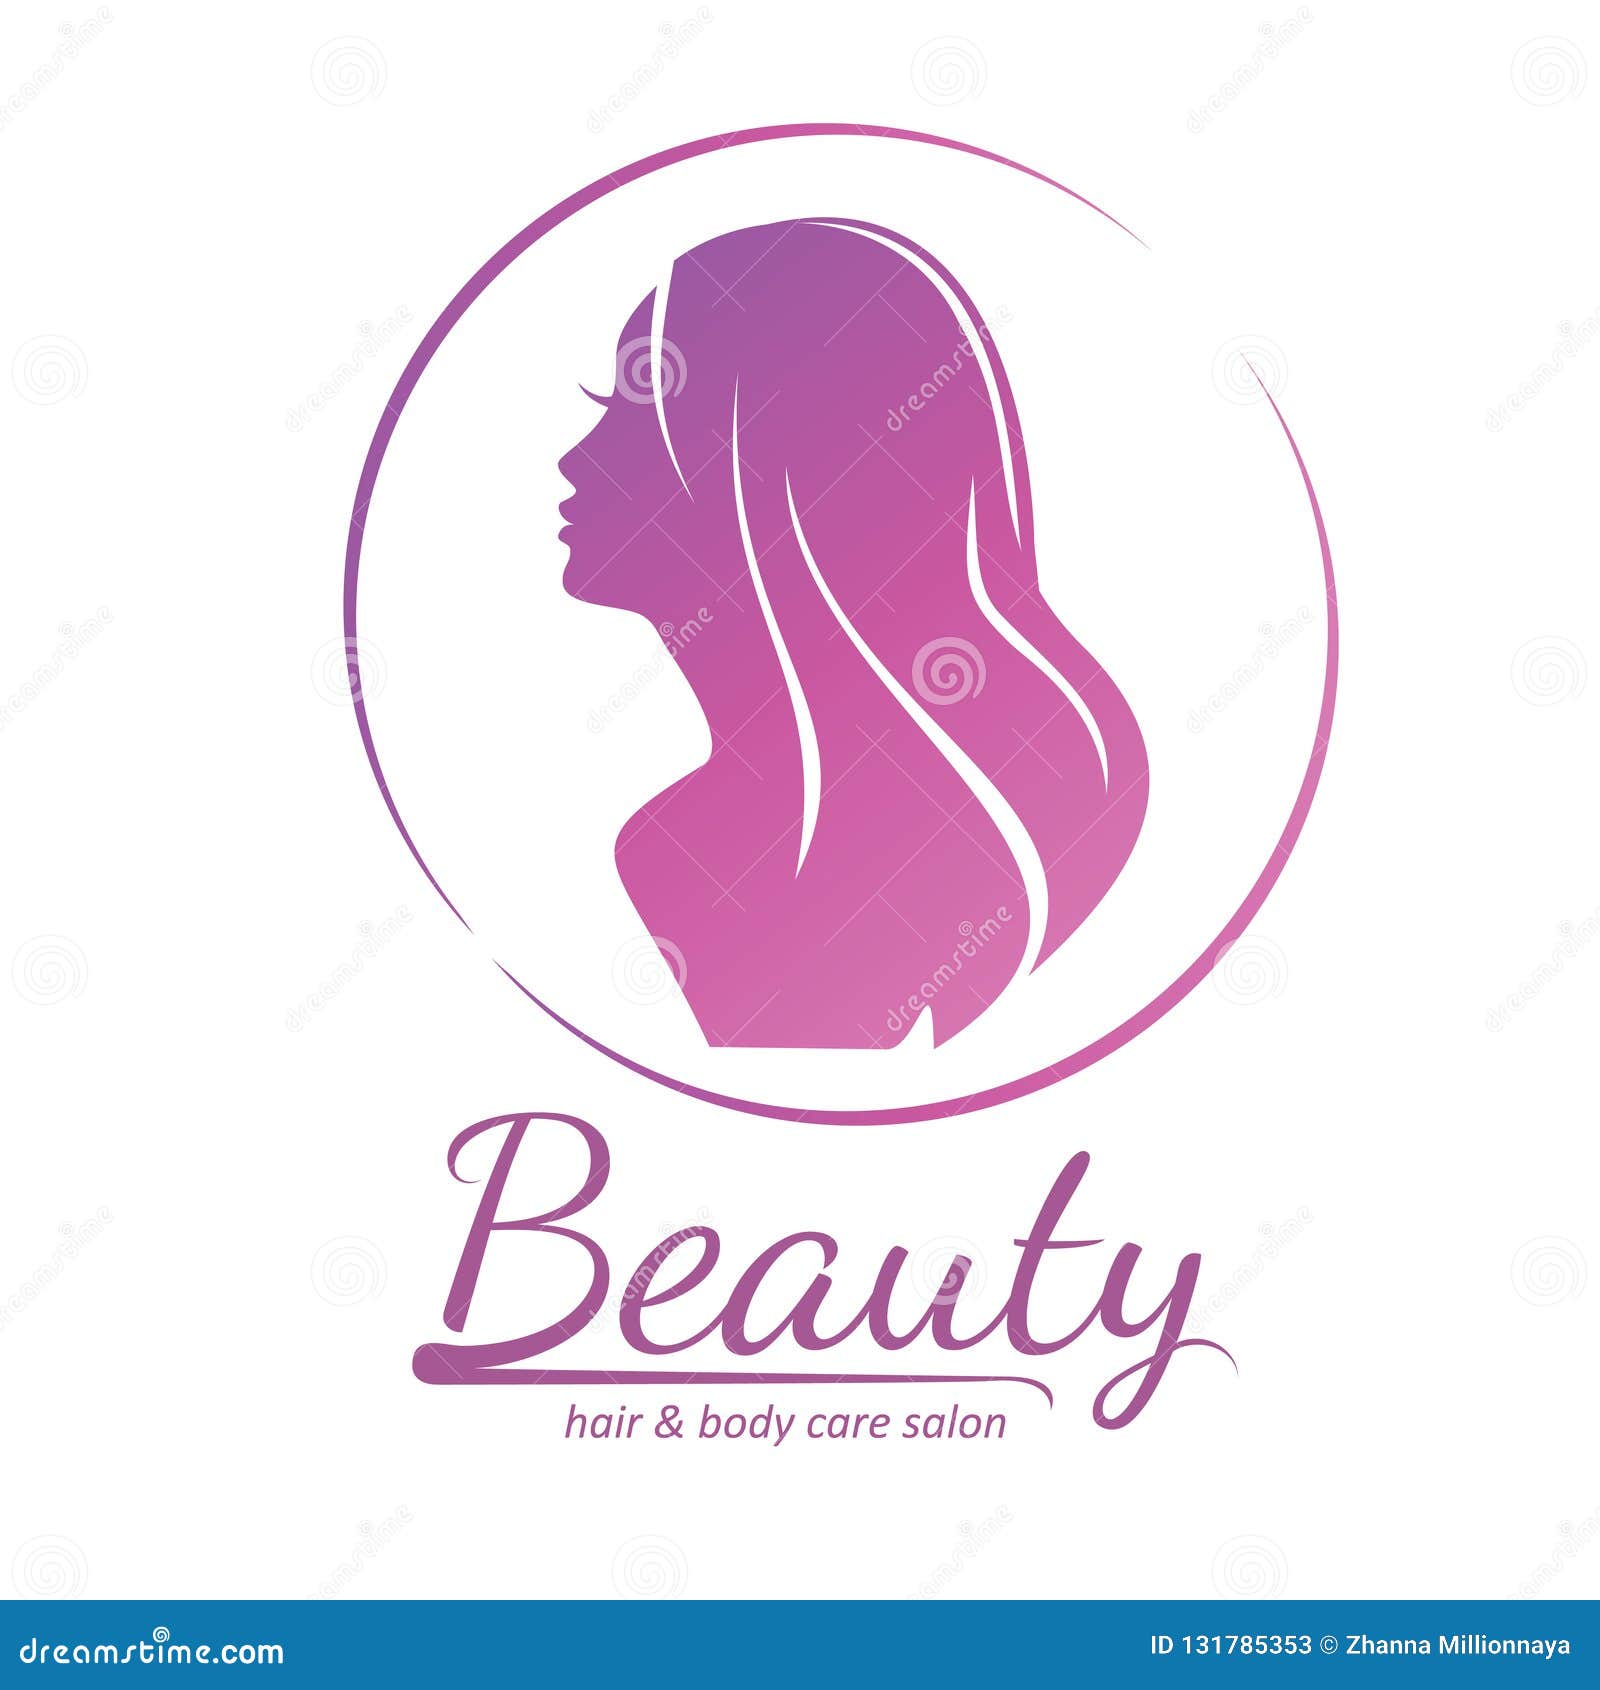 Womans Hair Style Stylized Sillhouette Stock Vector - Illustration of hair,  round: 131785353